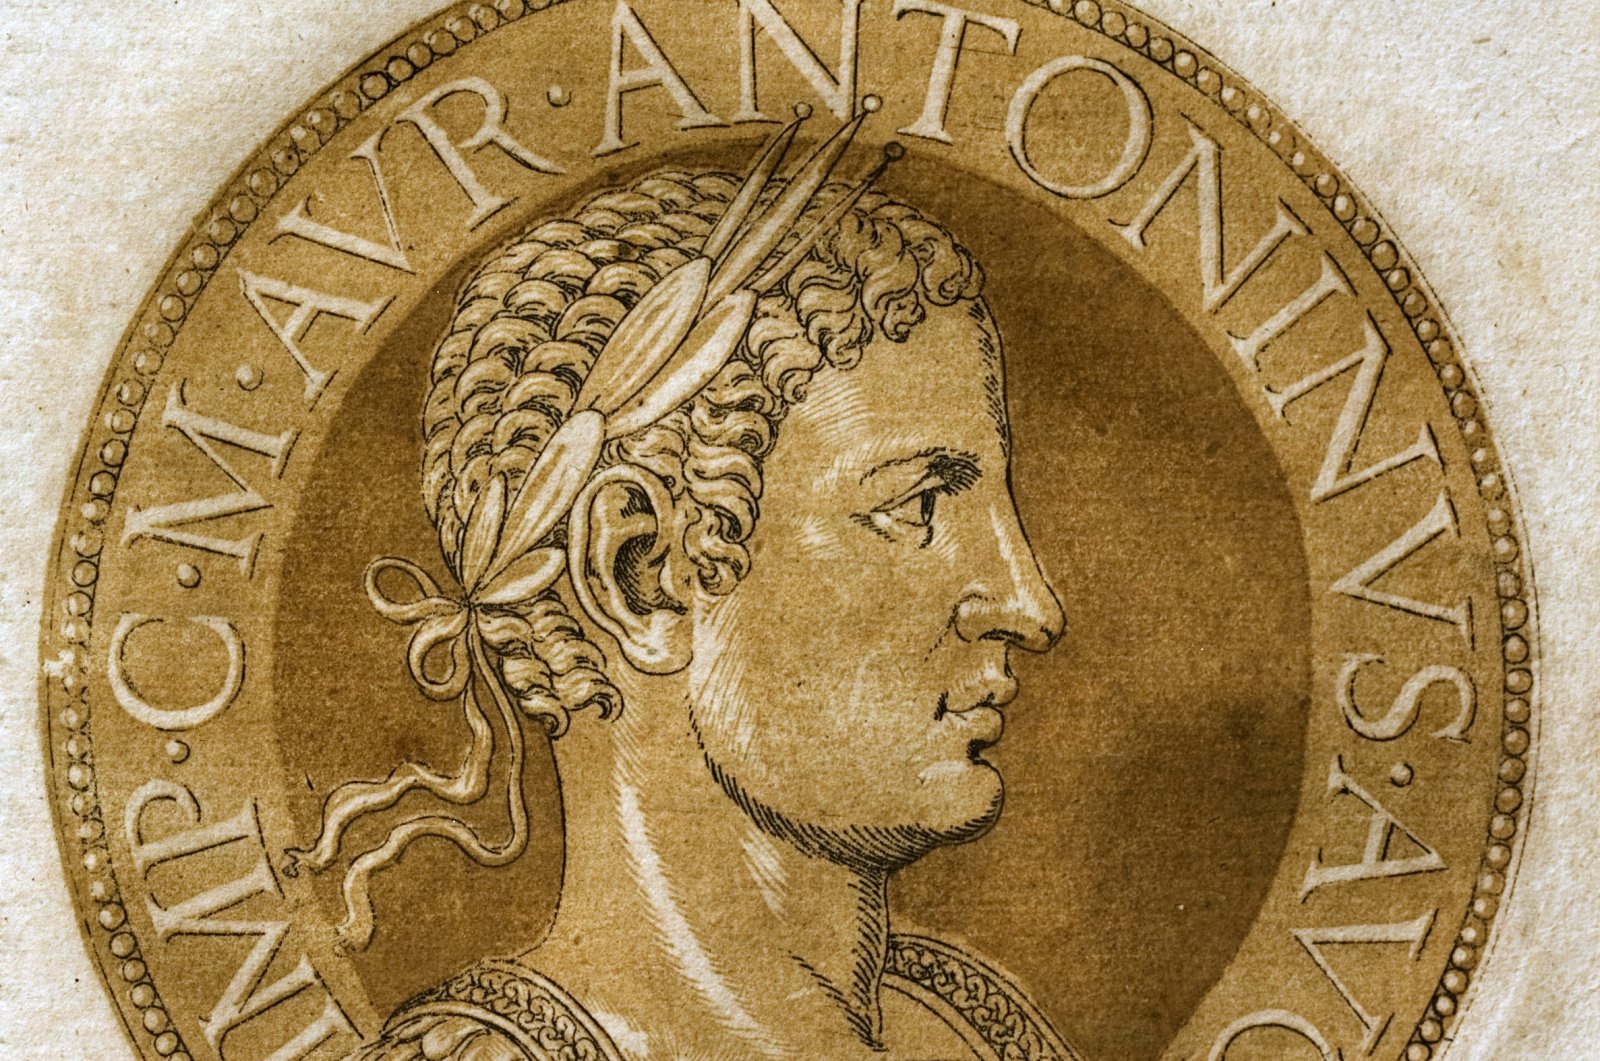 An illustration by Hubert Goltzius from his work &quot;Vivae Omnium Fere Imperatorum Imagines&quot; of a Chiaroscuro medallion portrait woodcut of Roman Emperor Elagabalus of the Severen dynasty. (Getty Images Photo)